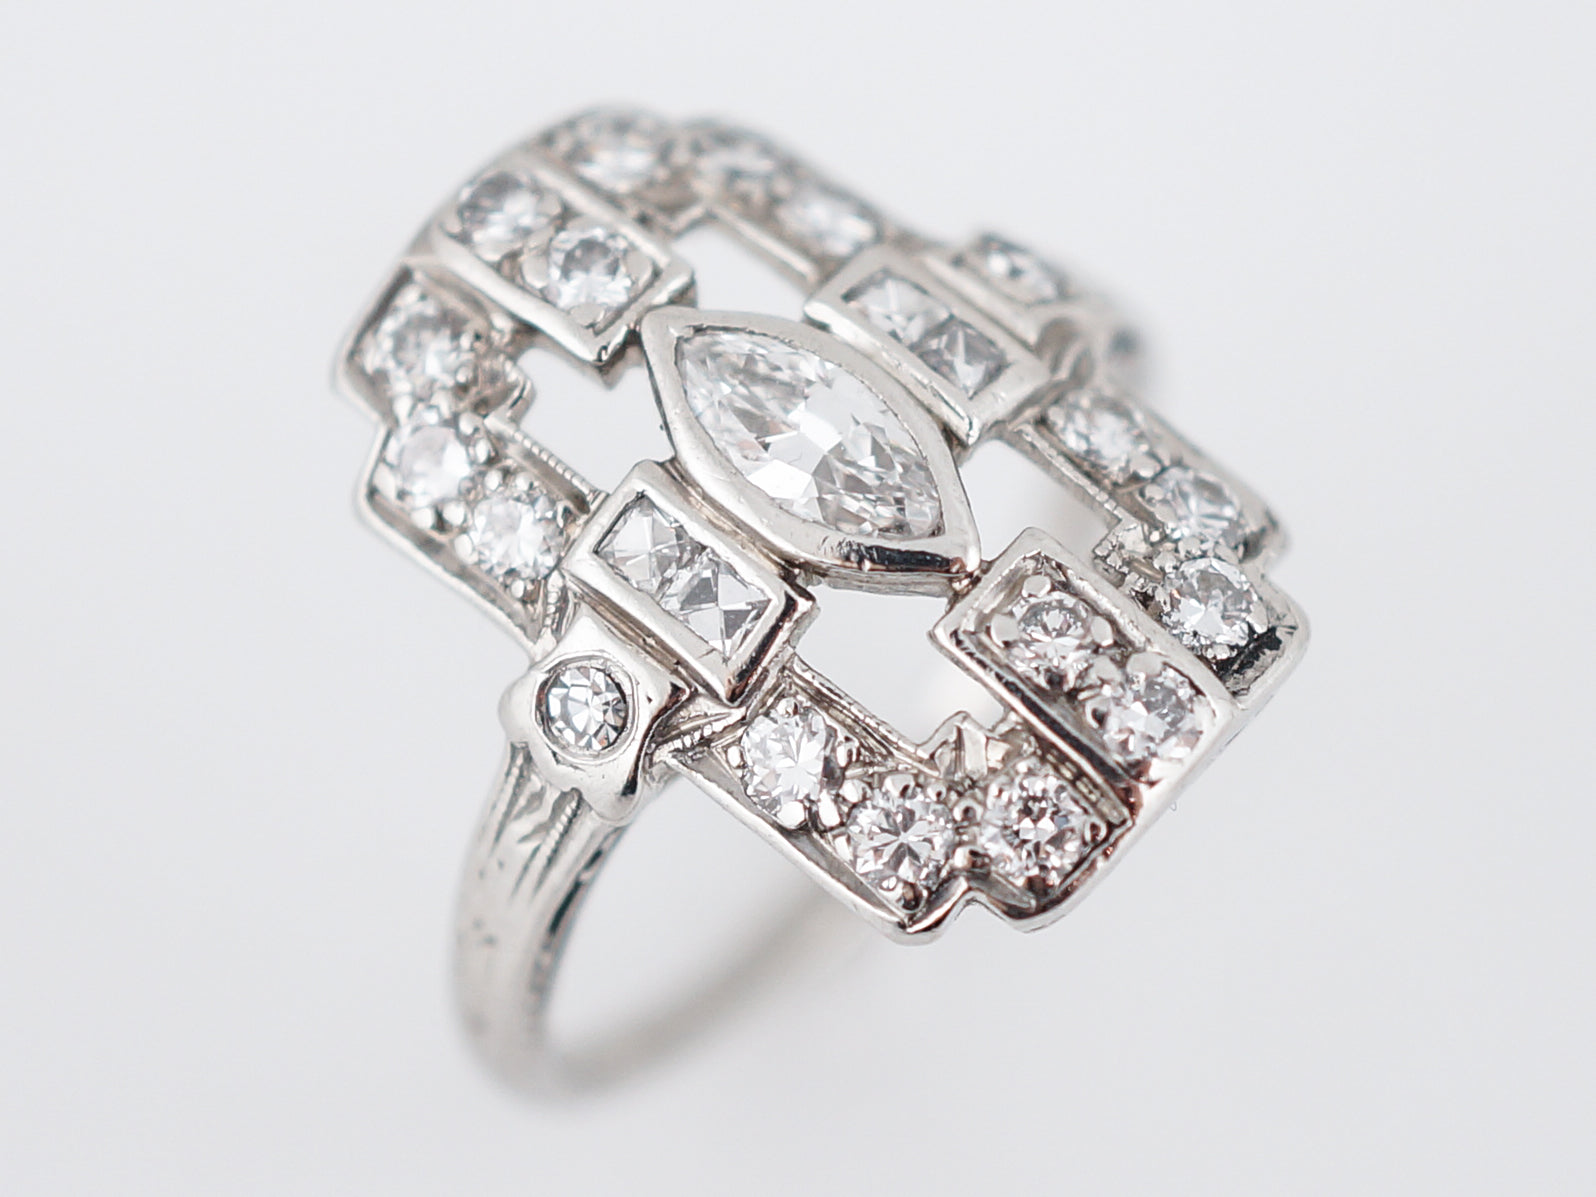 Antique Right Hand Ring Edwardian .61 Old Cut Diamonds in PlatinumComposition: Platinum Total Diamond Weight: .61ct Total Gram Weight: 4.30 g